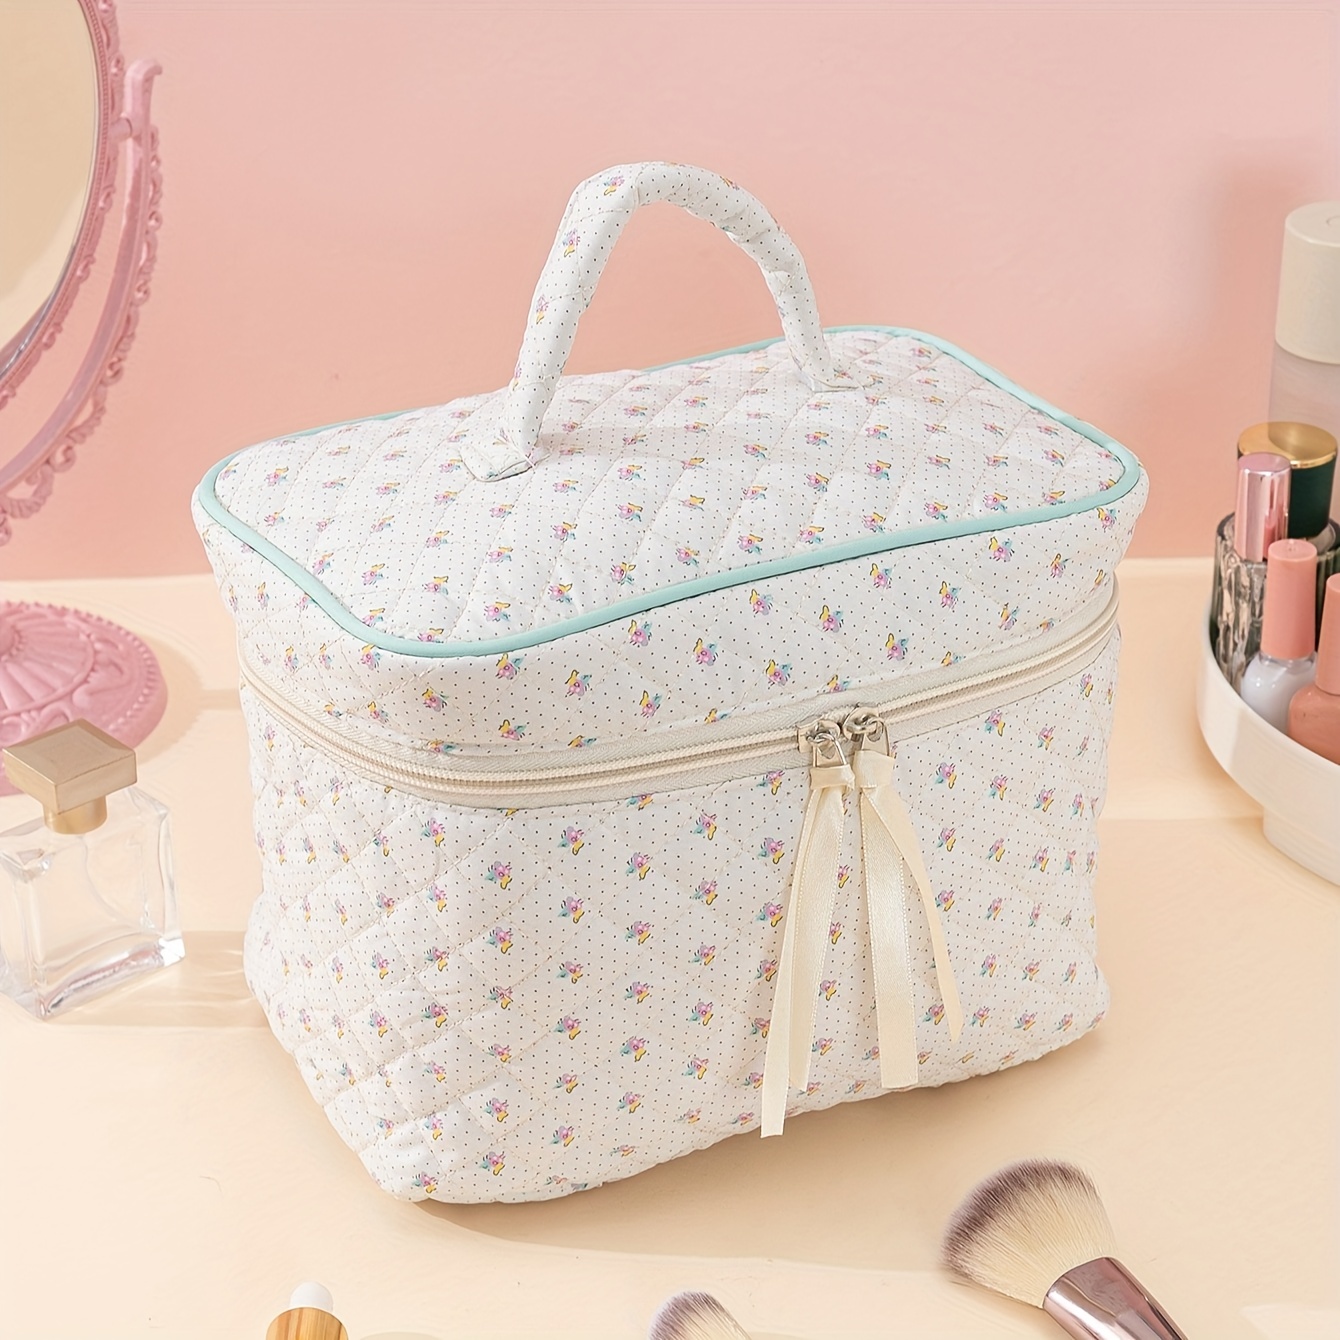  Travel Makeup Bag Rainbow Unicorn Star Portable Waterproof  Cosmetic Bag with Zipper, PU Leather Toiletry Bag, Travel Cosmetic  Organizer Bag, Accessories Makeup Pouch for Women Girls : Beauty & Personal  Care